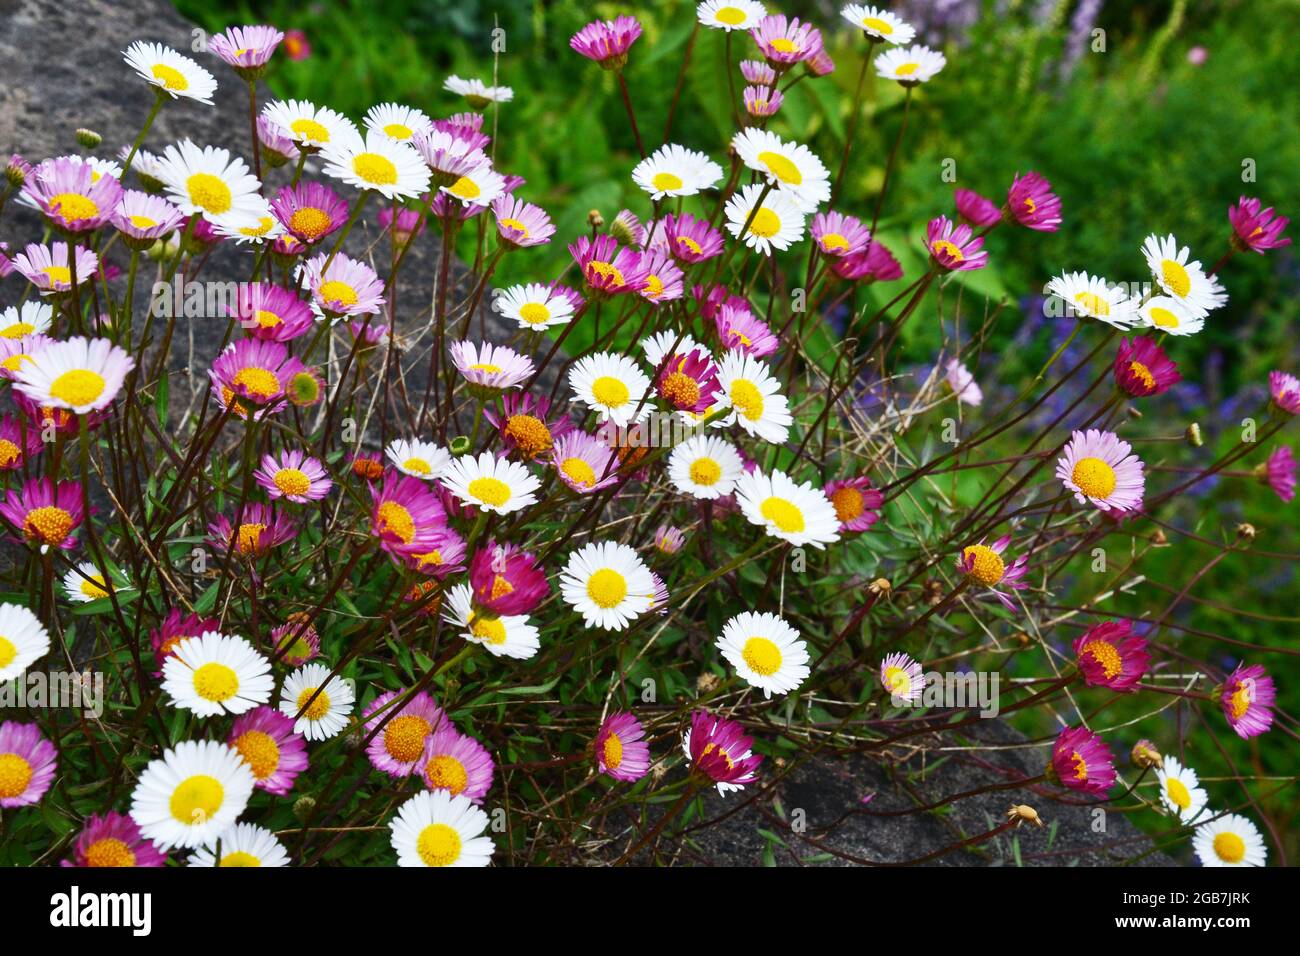 Pink and white daisies in a British garden, UK Stock Photo